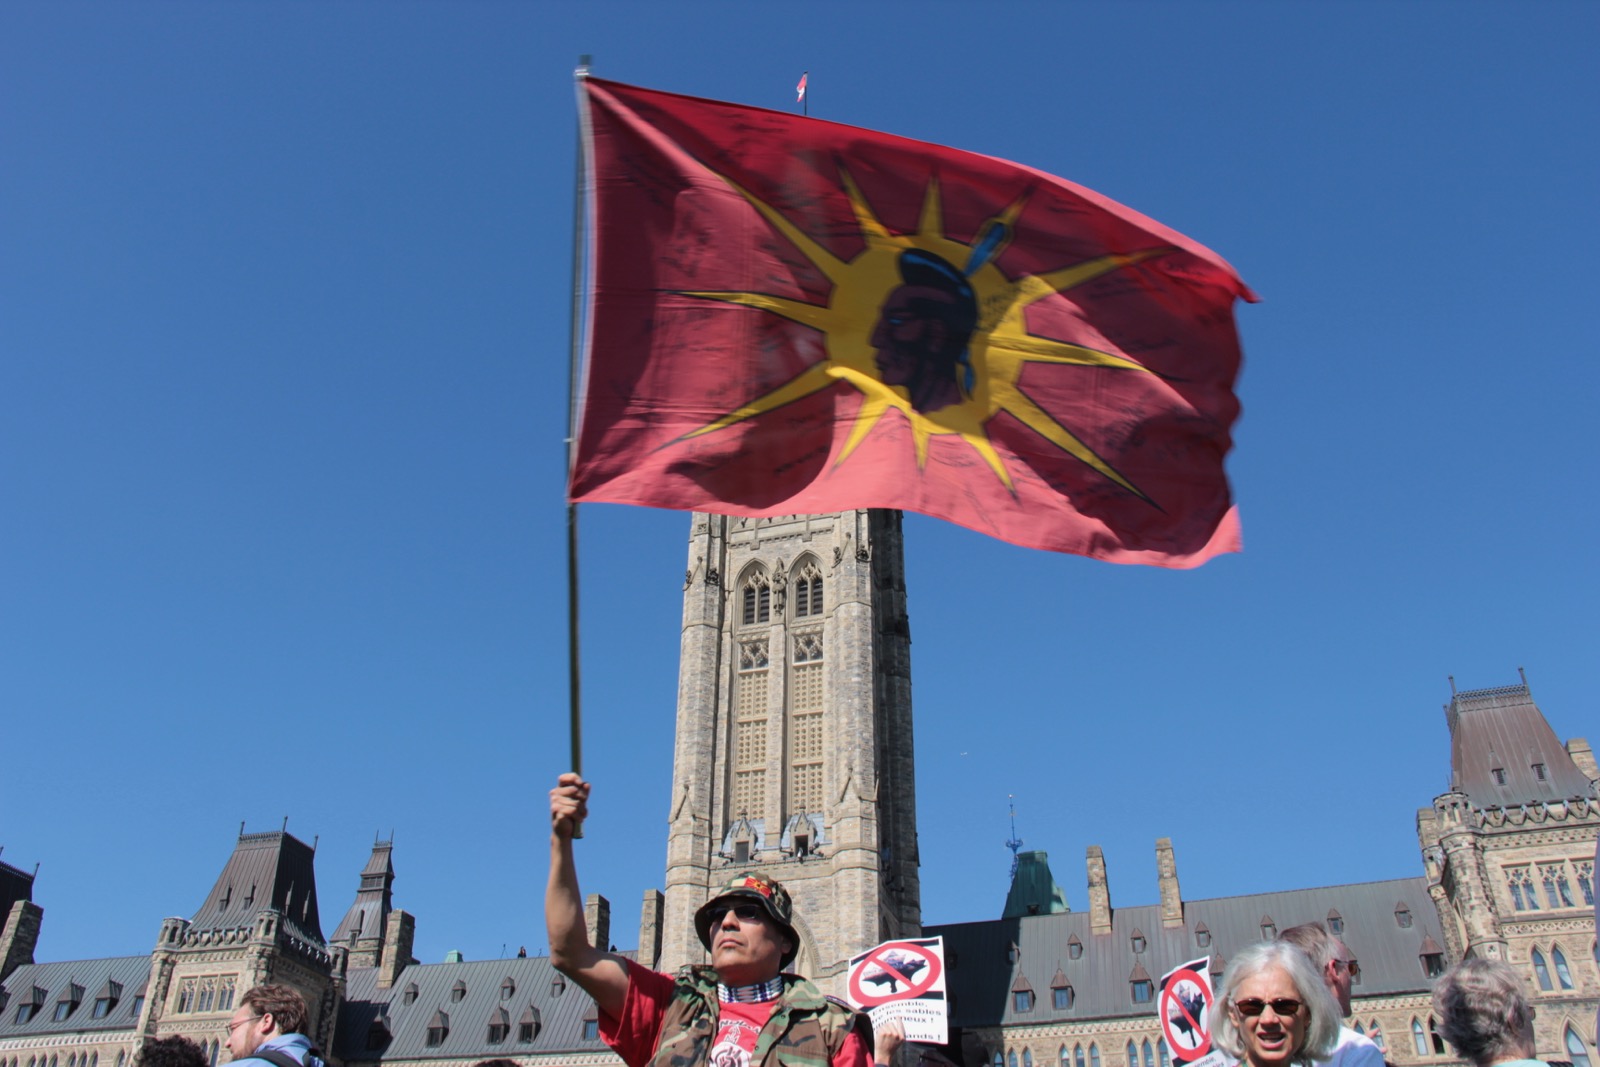 Doug George-Kanentiio: Foreign governments trample on Mohawk sovereignty